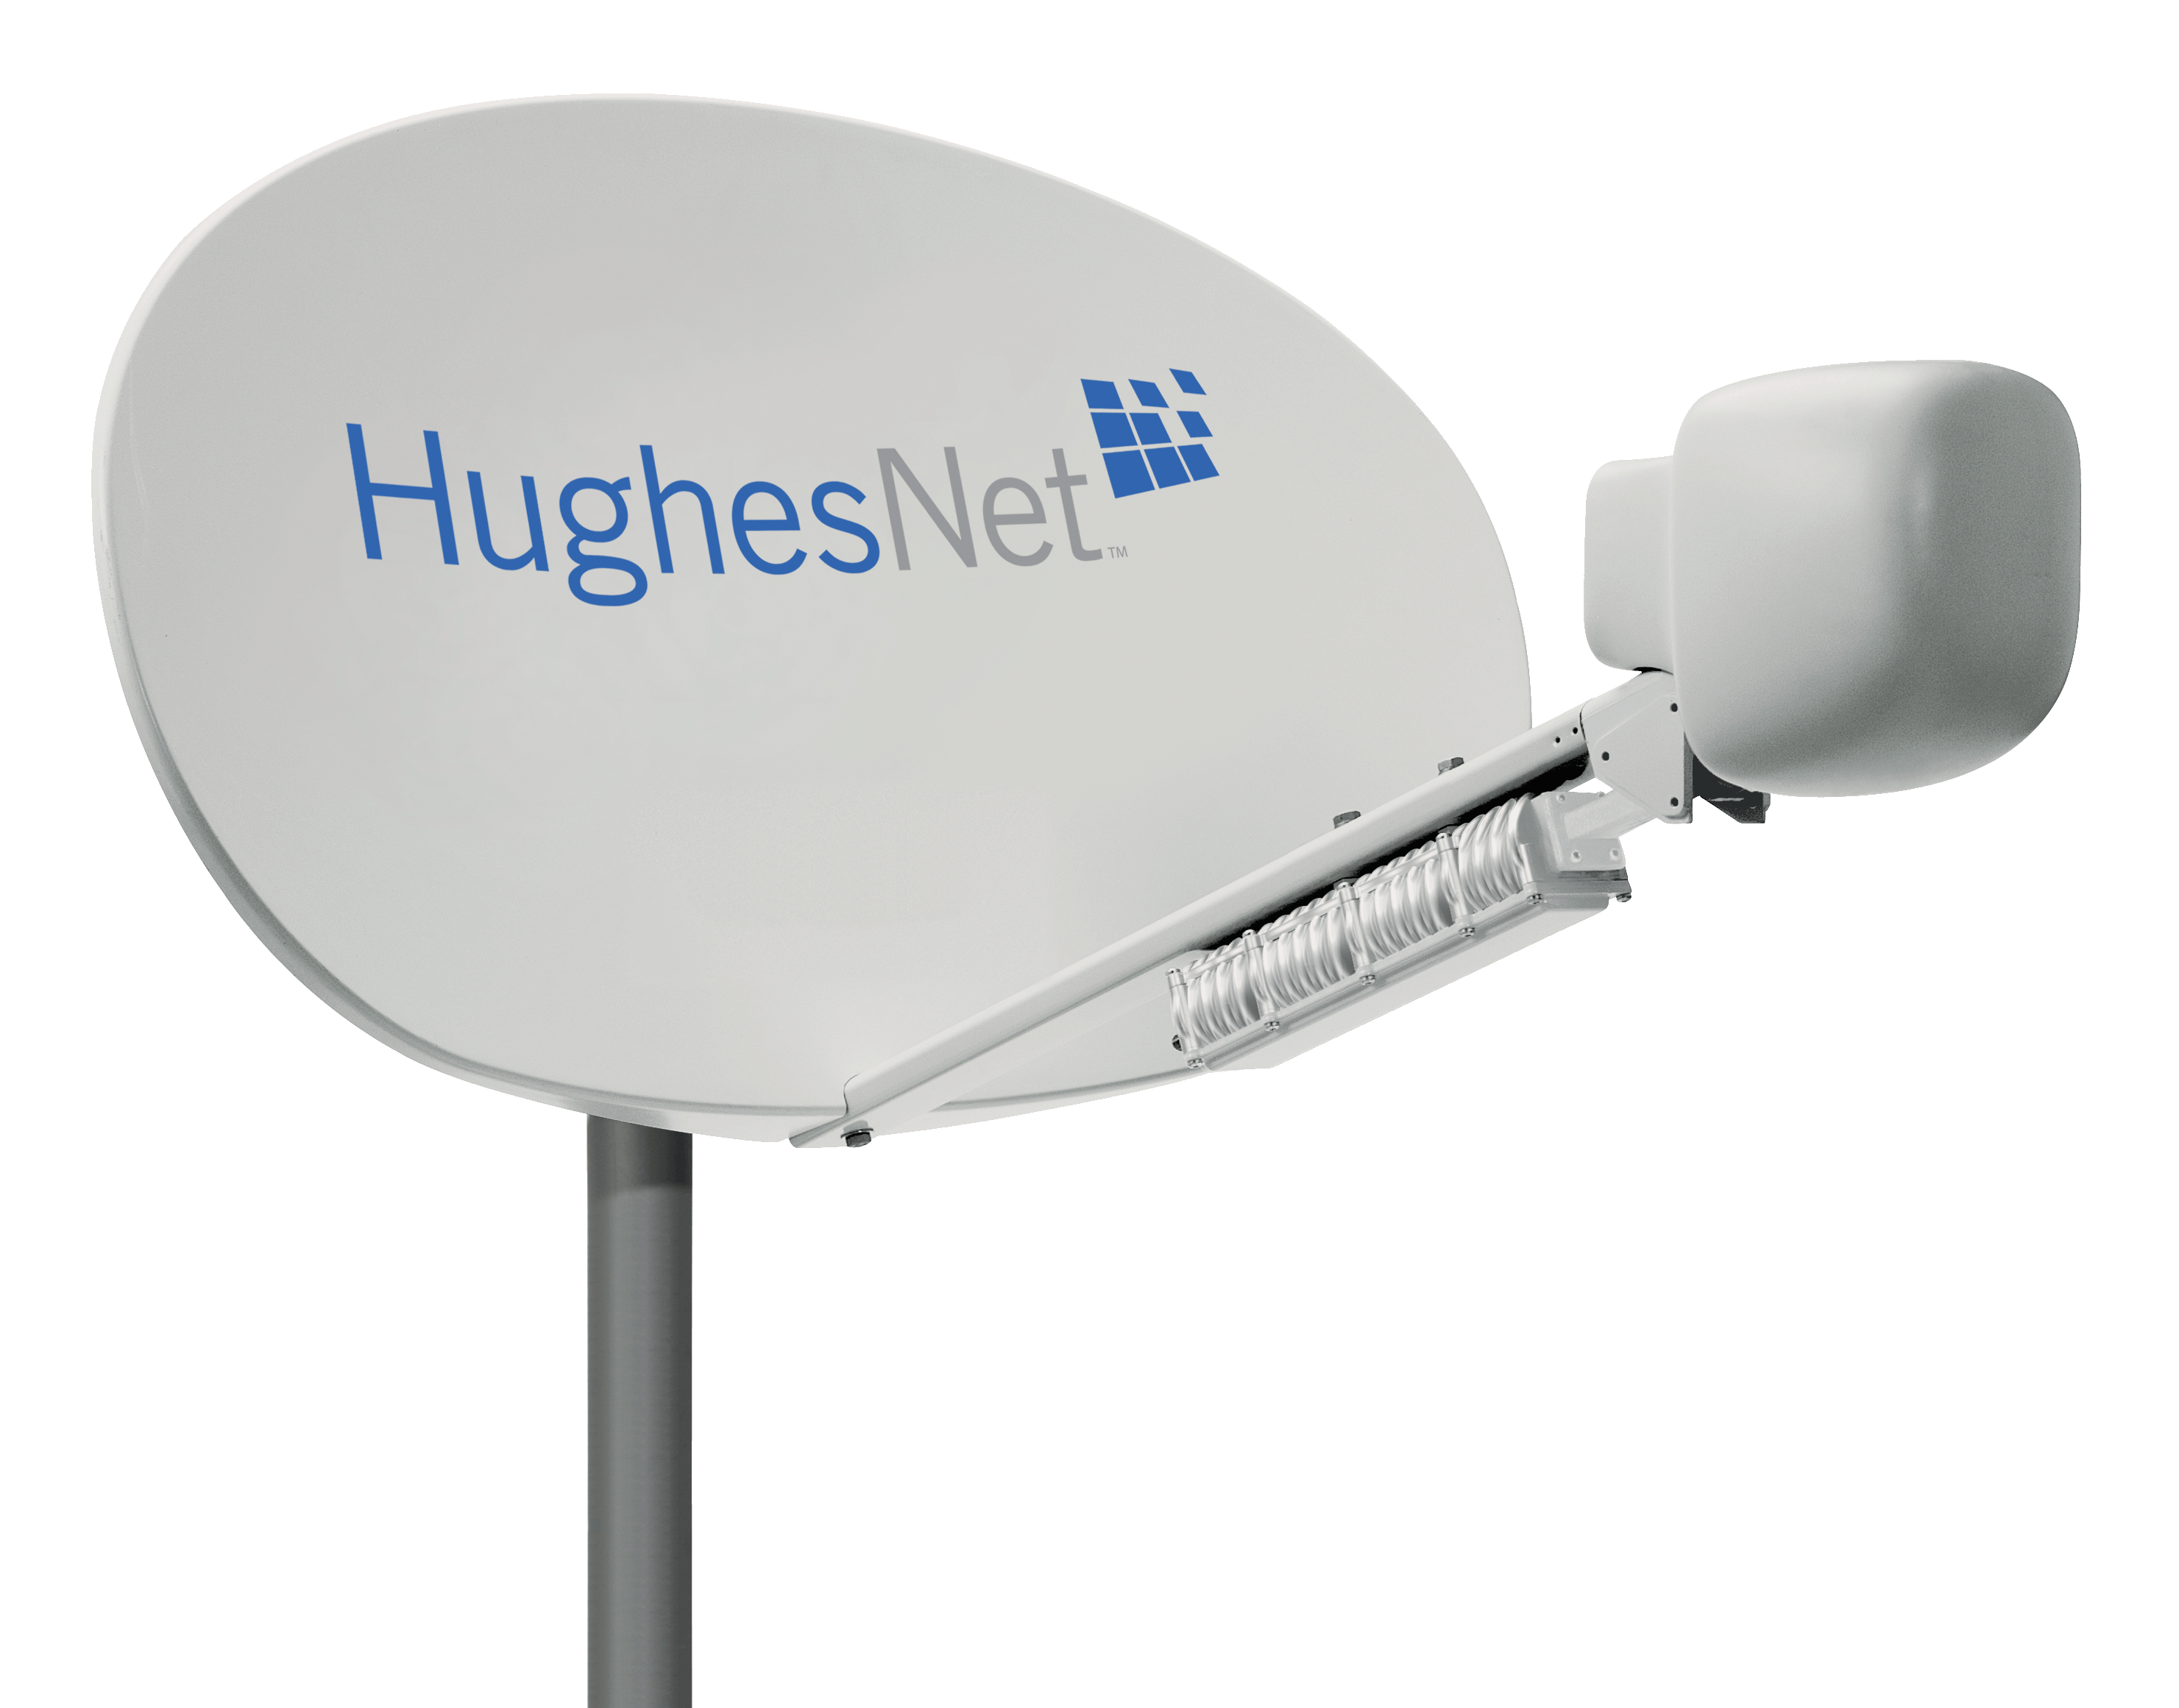 The protocols for HughesNet, the world's leading internet-via-satellite service, we developed by Hughes Network Systems and UMD's John Baras through MIPS.